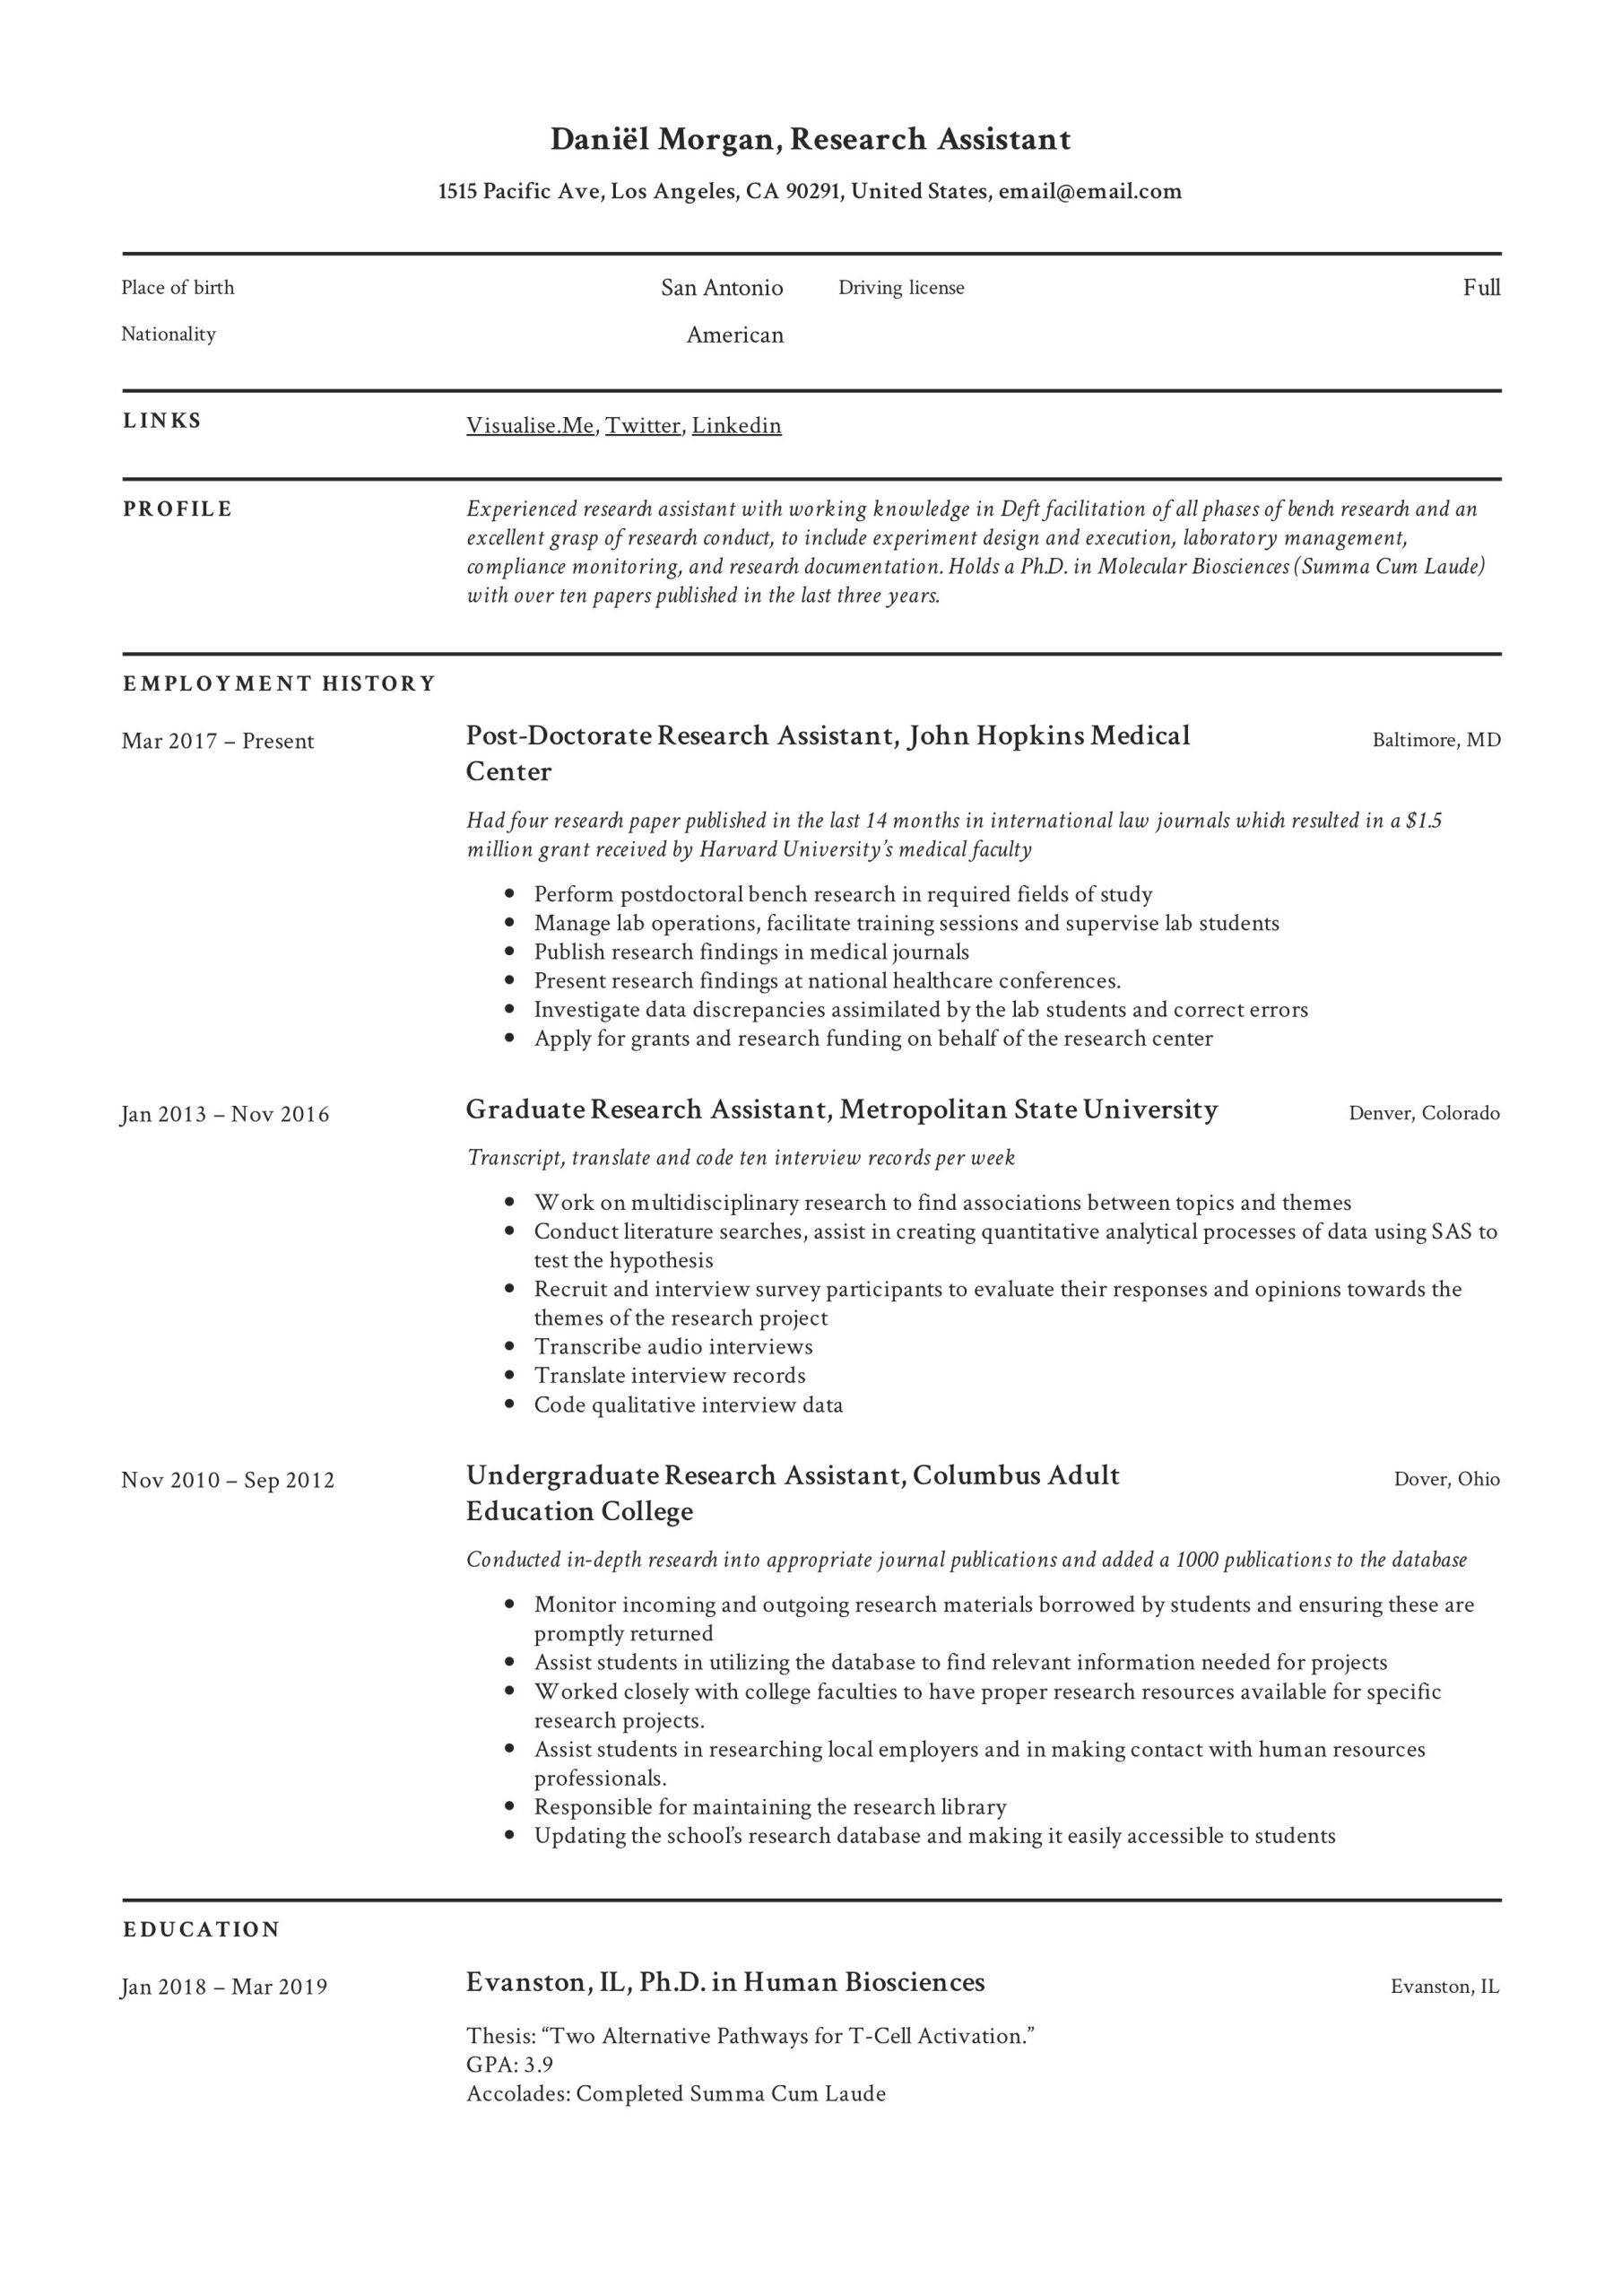 Sample Resume for Undergraduate Research assistant Research assistant Resume & Writing Guide  12 Resume Examples